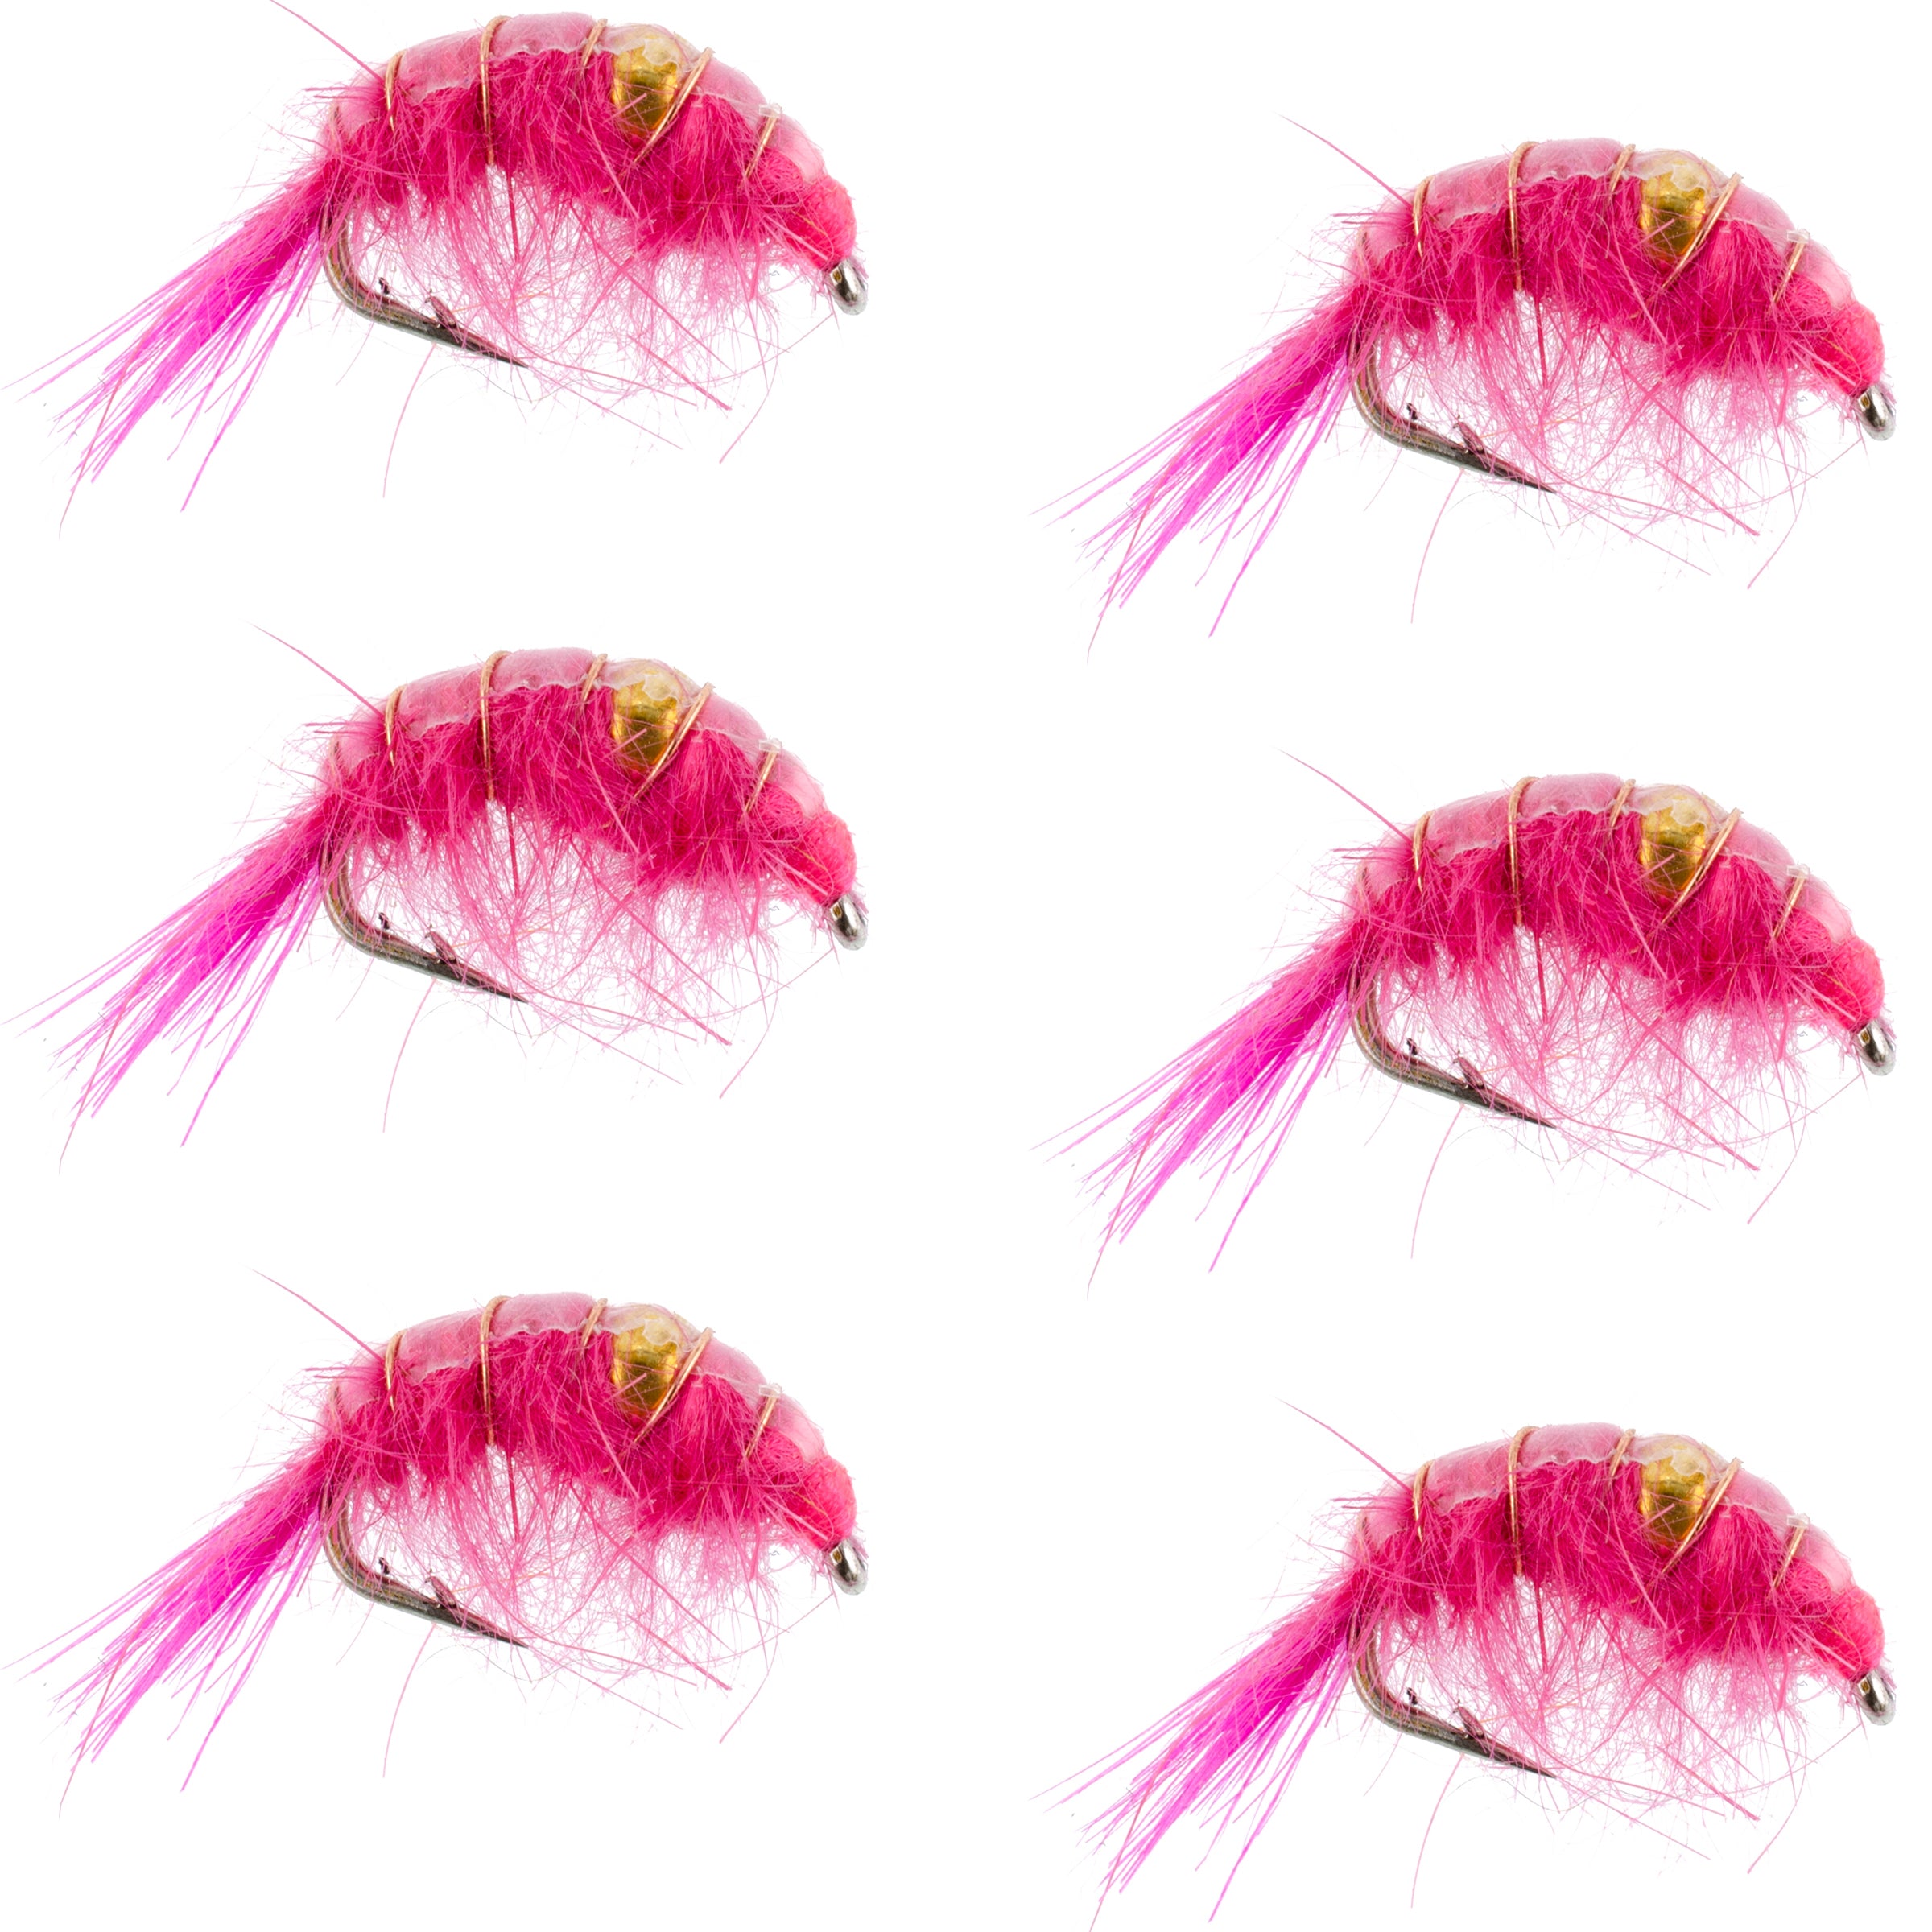 Pink Beaded Shrimp Scud Pattern - 6 Flies - Size 12 - Tailwater Lake Fly Fishing Nymph Flies